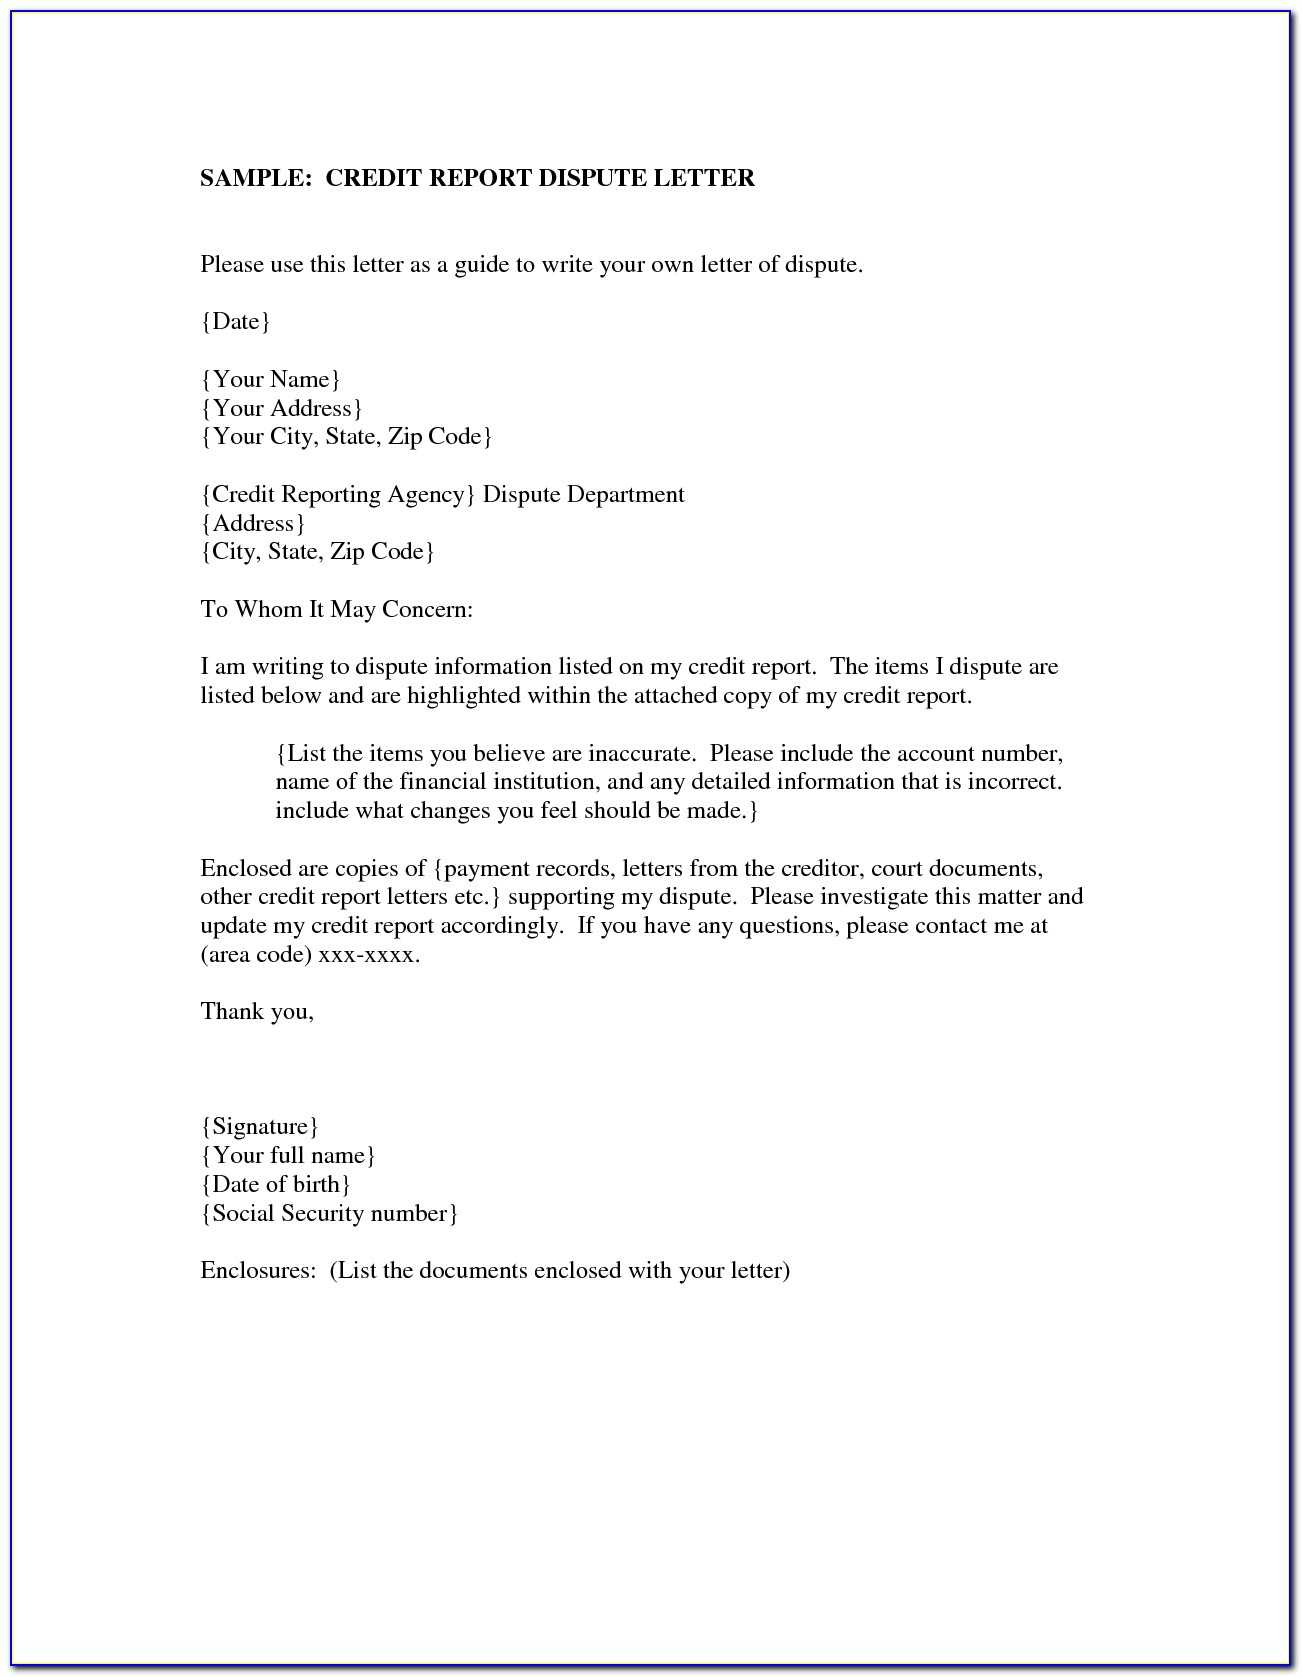 Dispute Credit Report Letter | | Best Business Template For Pertaining To Credit Dispute Letter Template